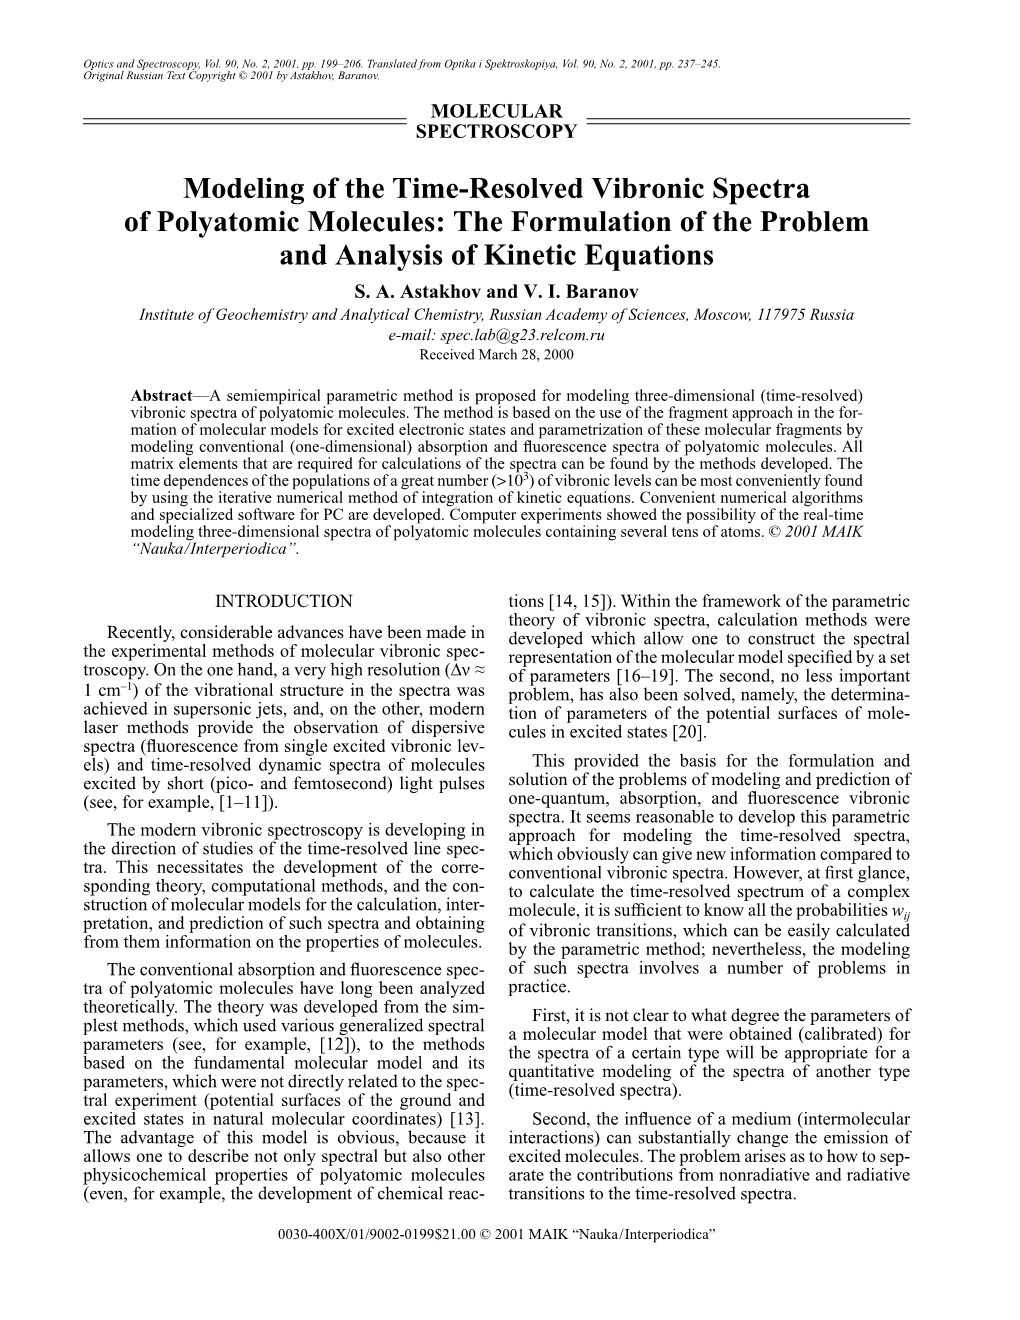 Modeling of the Time-Resolved Vibronic Spectra of Polyatomic Molecules: the Formulation of the Problem and Analysis of Kinetic Equations S